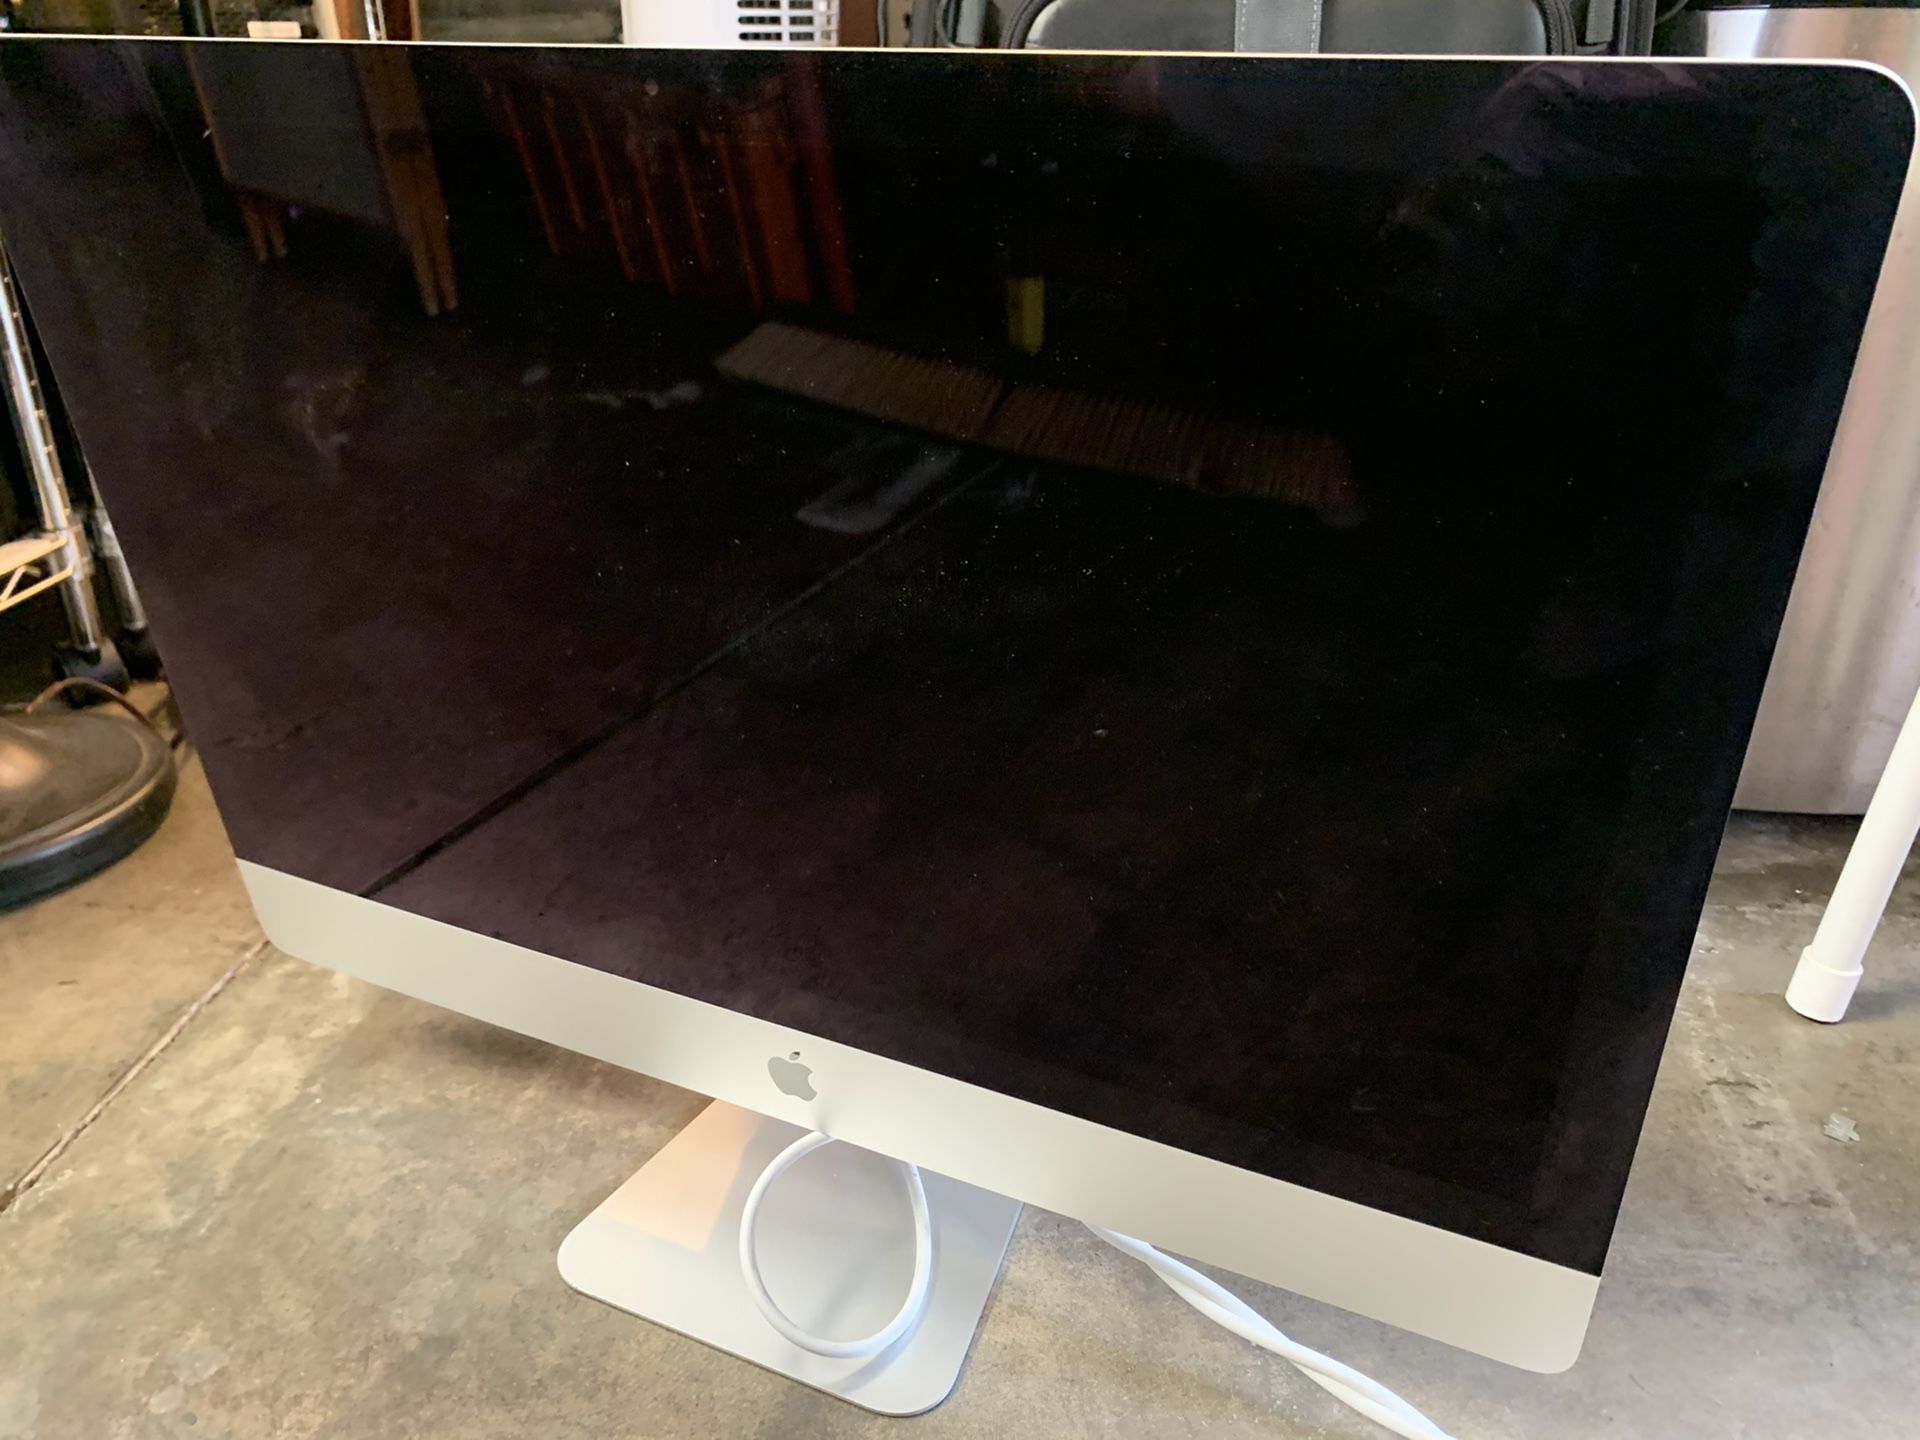 Apple iMac A1419 27 inch all-in-one desktop computer with keyboard and mouse